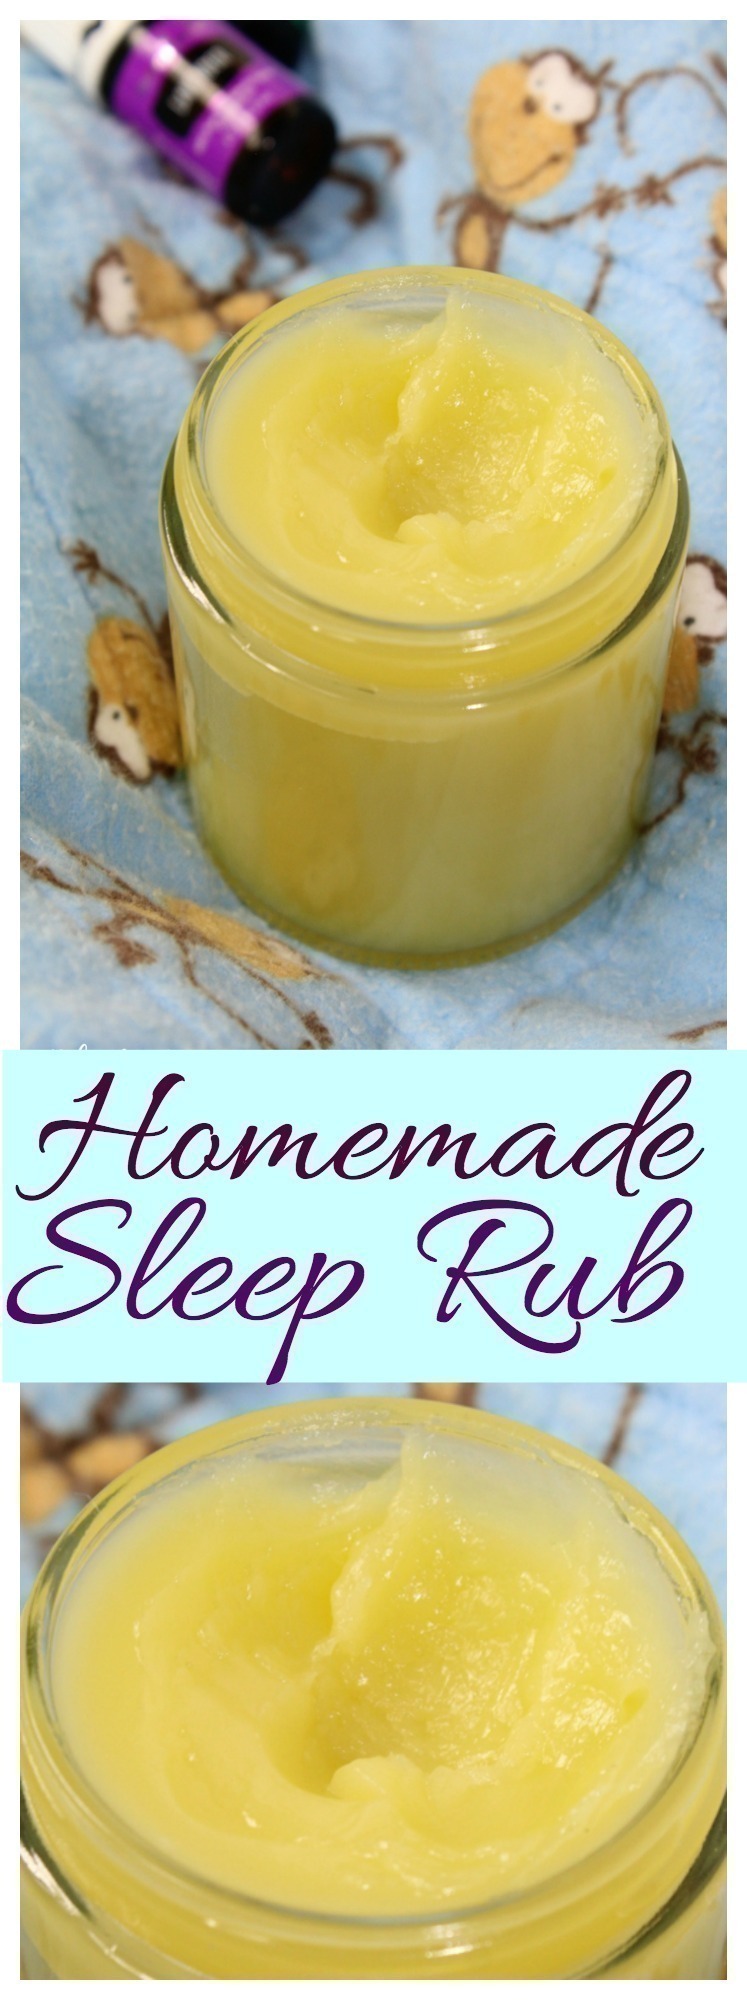 Rest easy with this simple homemade sleep rub, made with simple ingredients and essential oils that will help support a healthy rest!